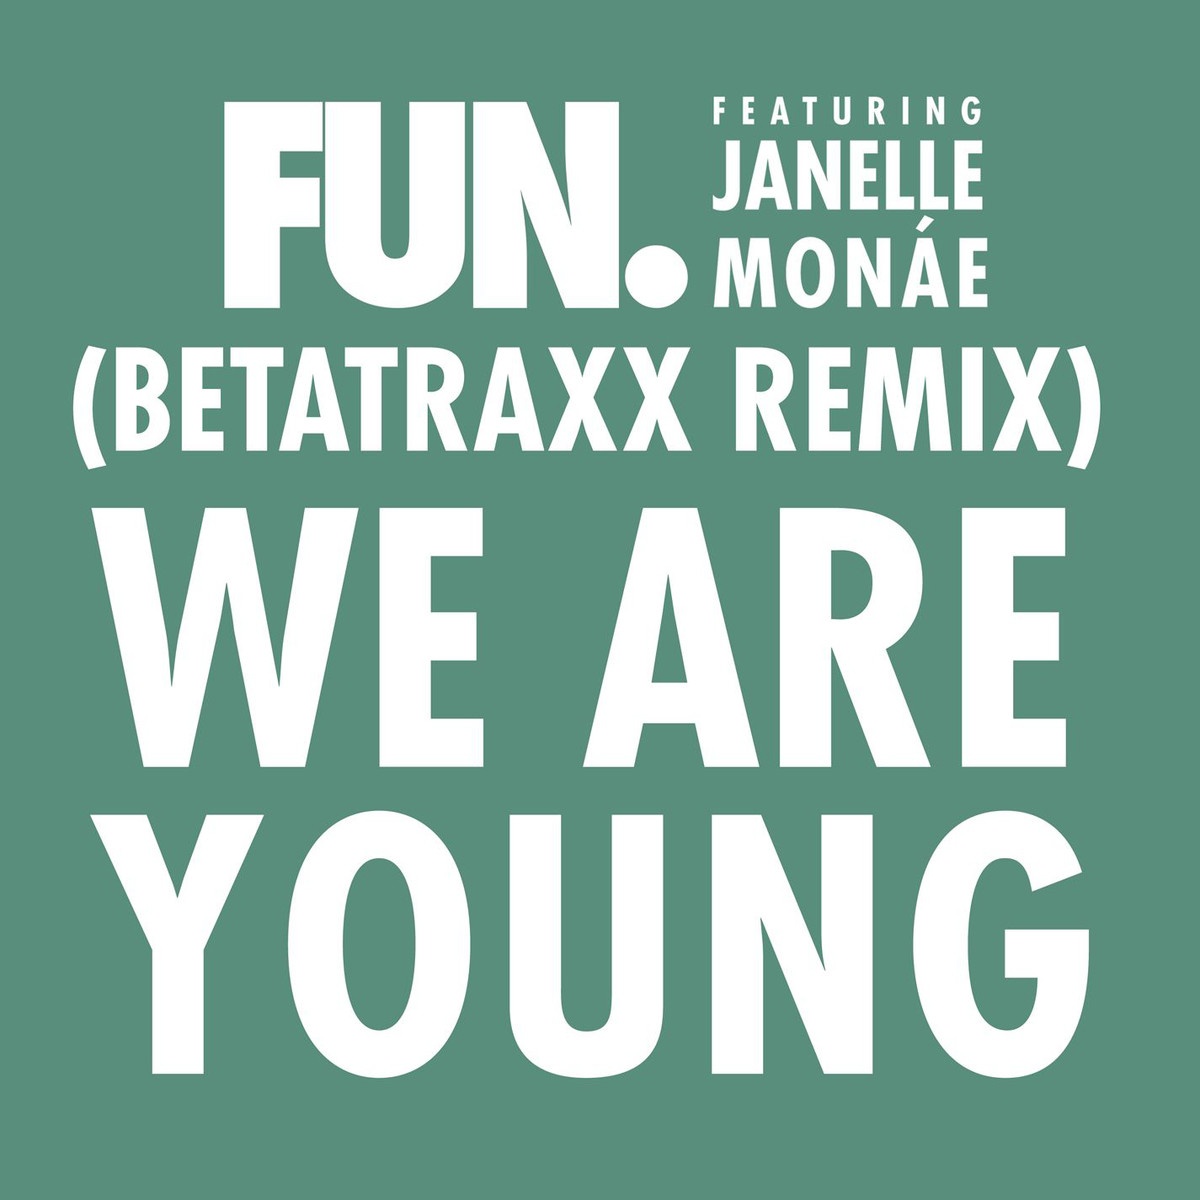 We Are Young (Betatraxx Remix)